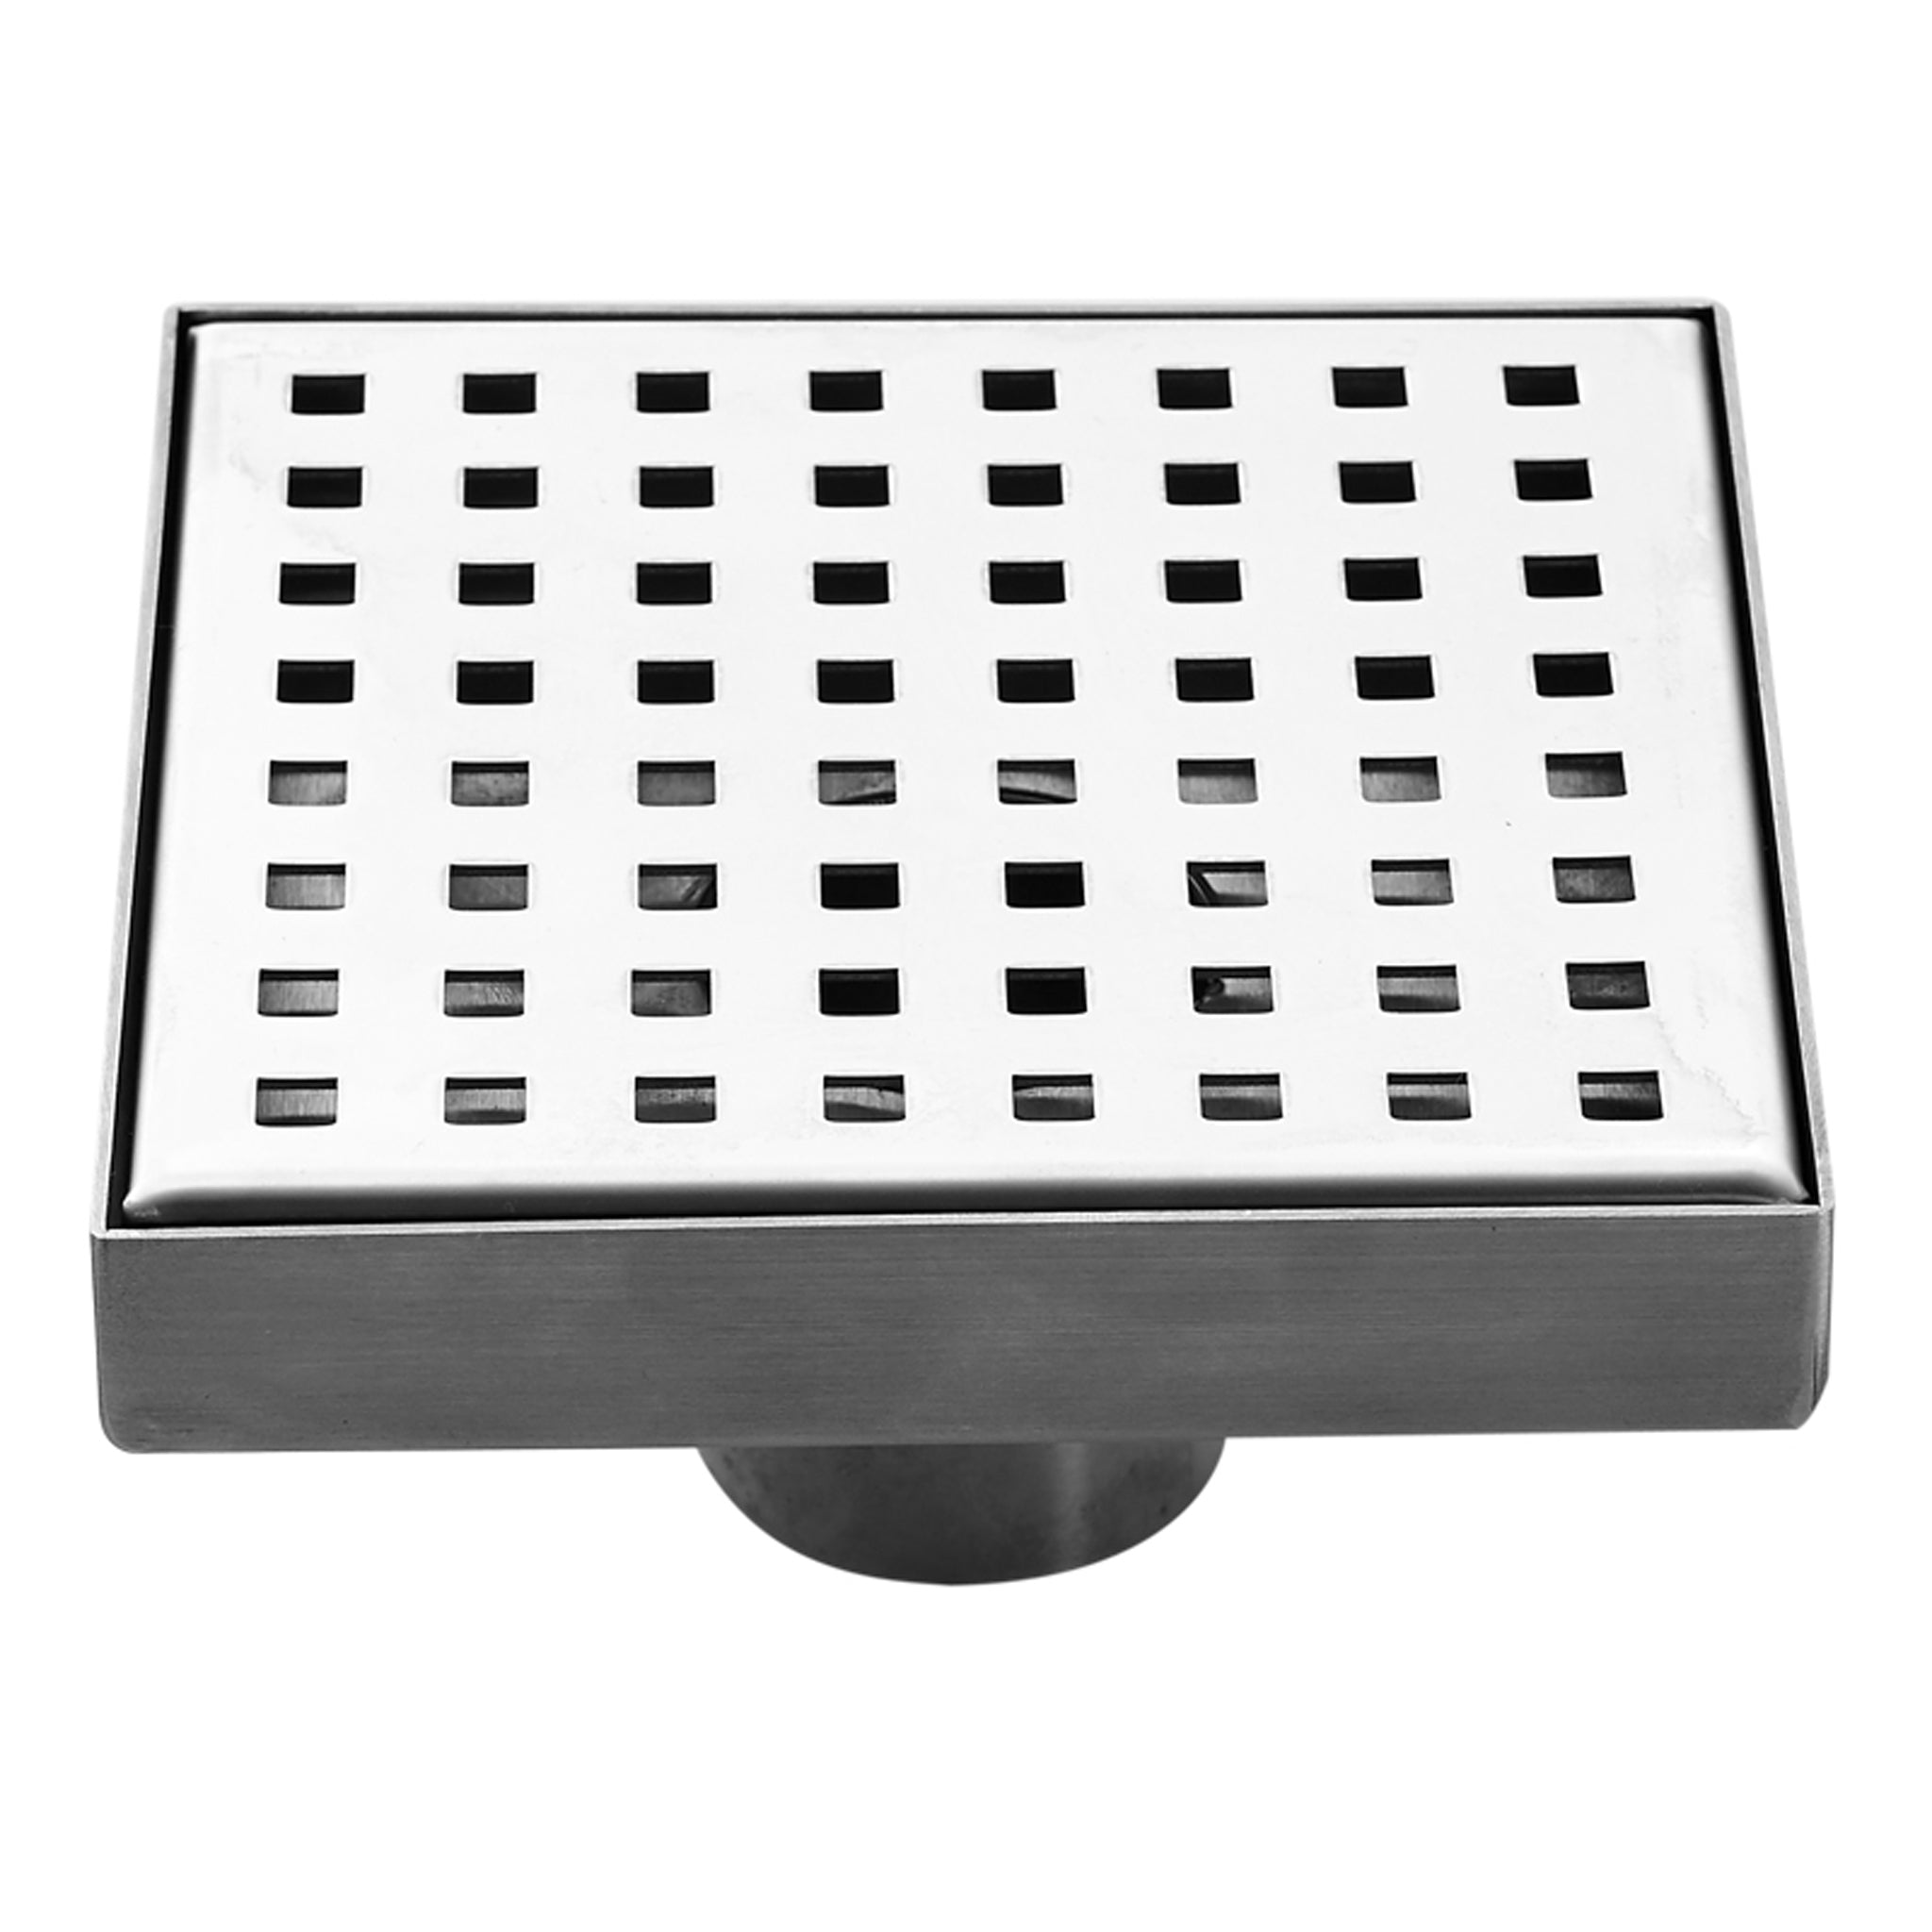 6 Stainless Steel Floor and Shower Drain